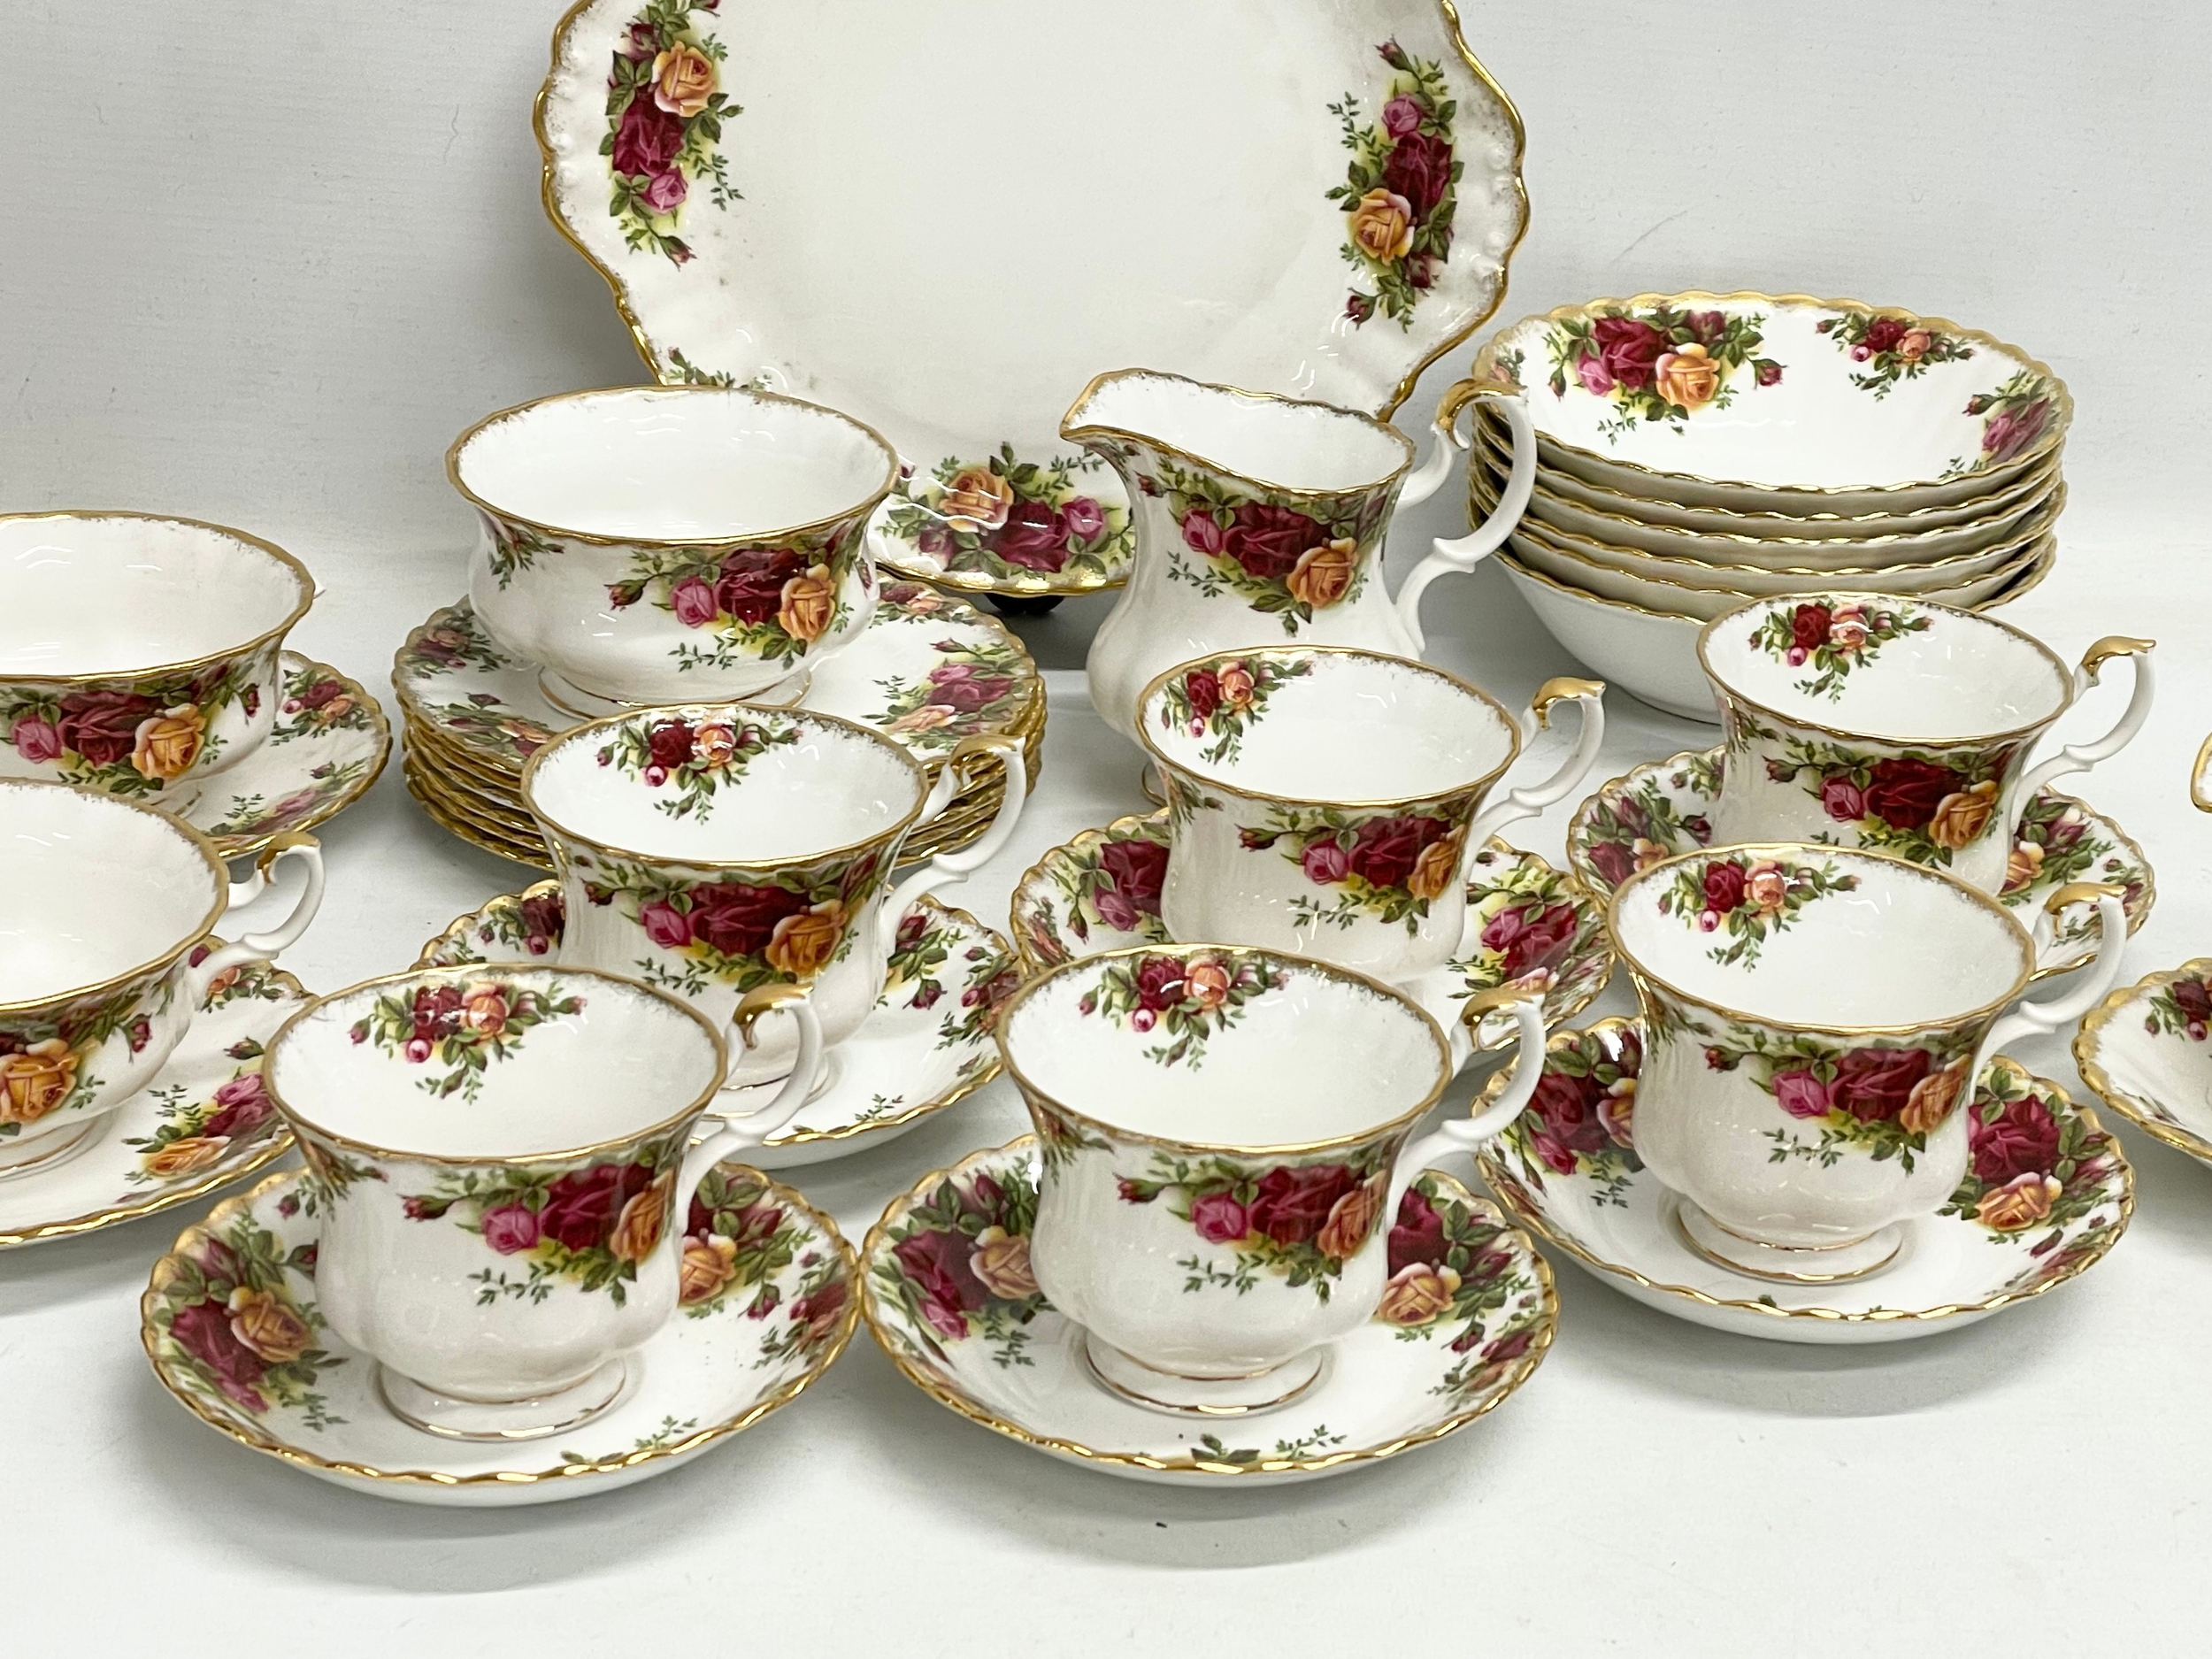 33 pieces of Royal Albert ‘Old Country Roses’ cake plate, 6 soup bowls, gravy boat and saucer. - Image 4 of 6